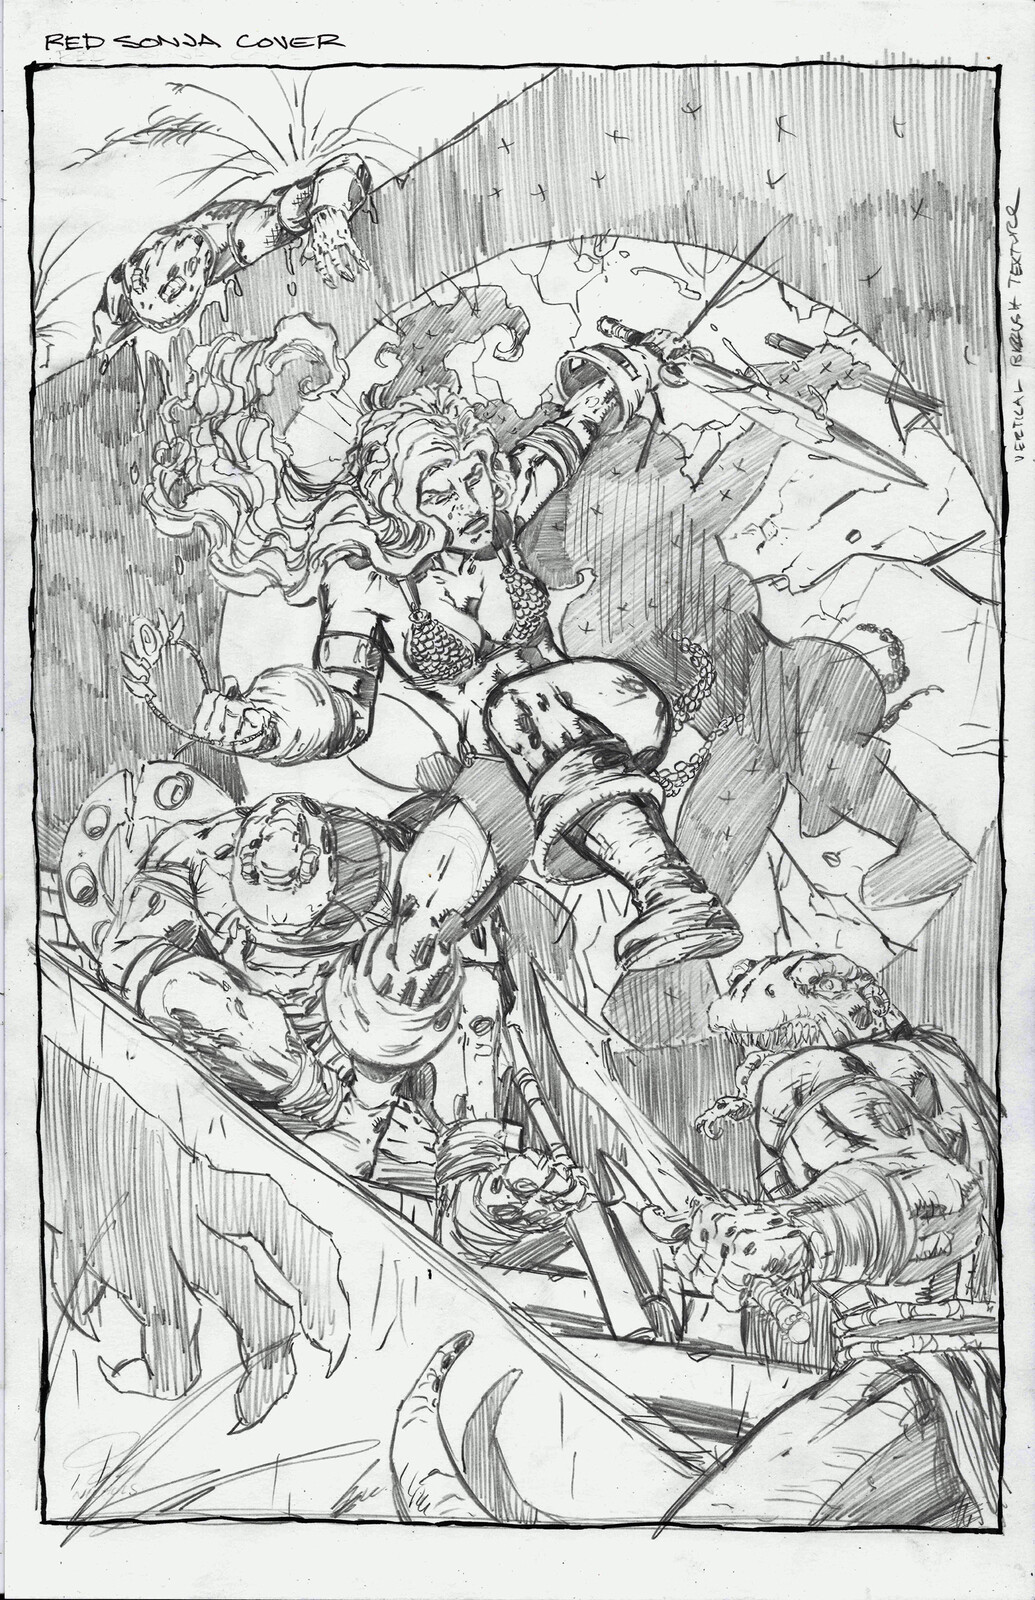 Original pencils for the Red Sonja #1 cover.